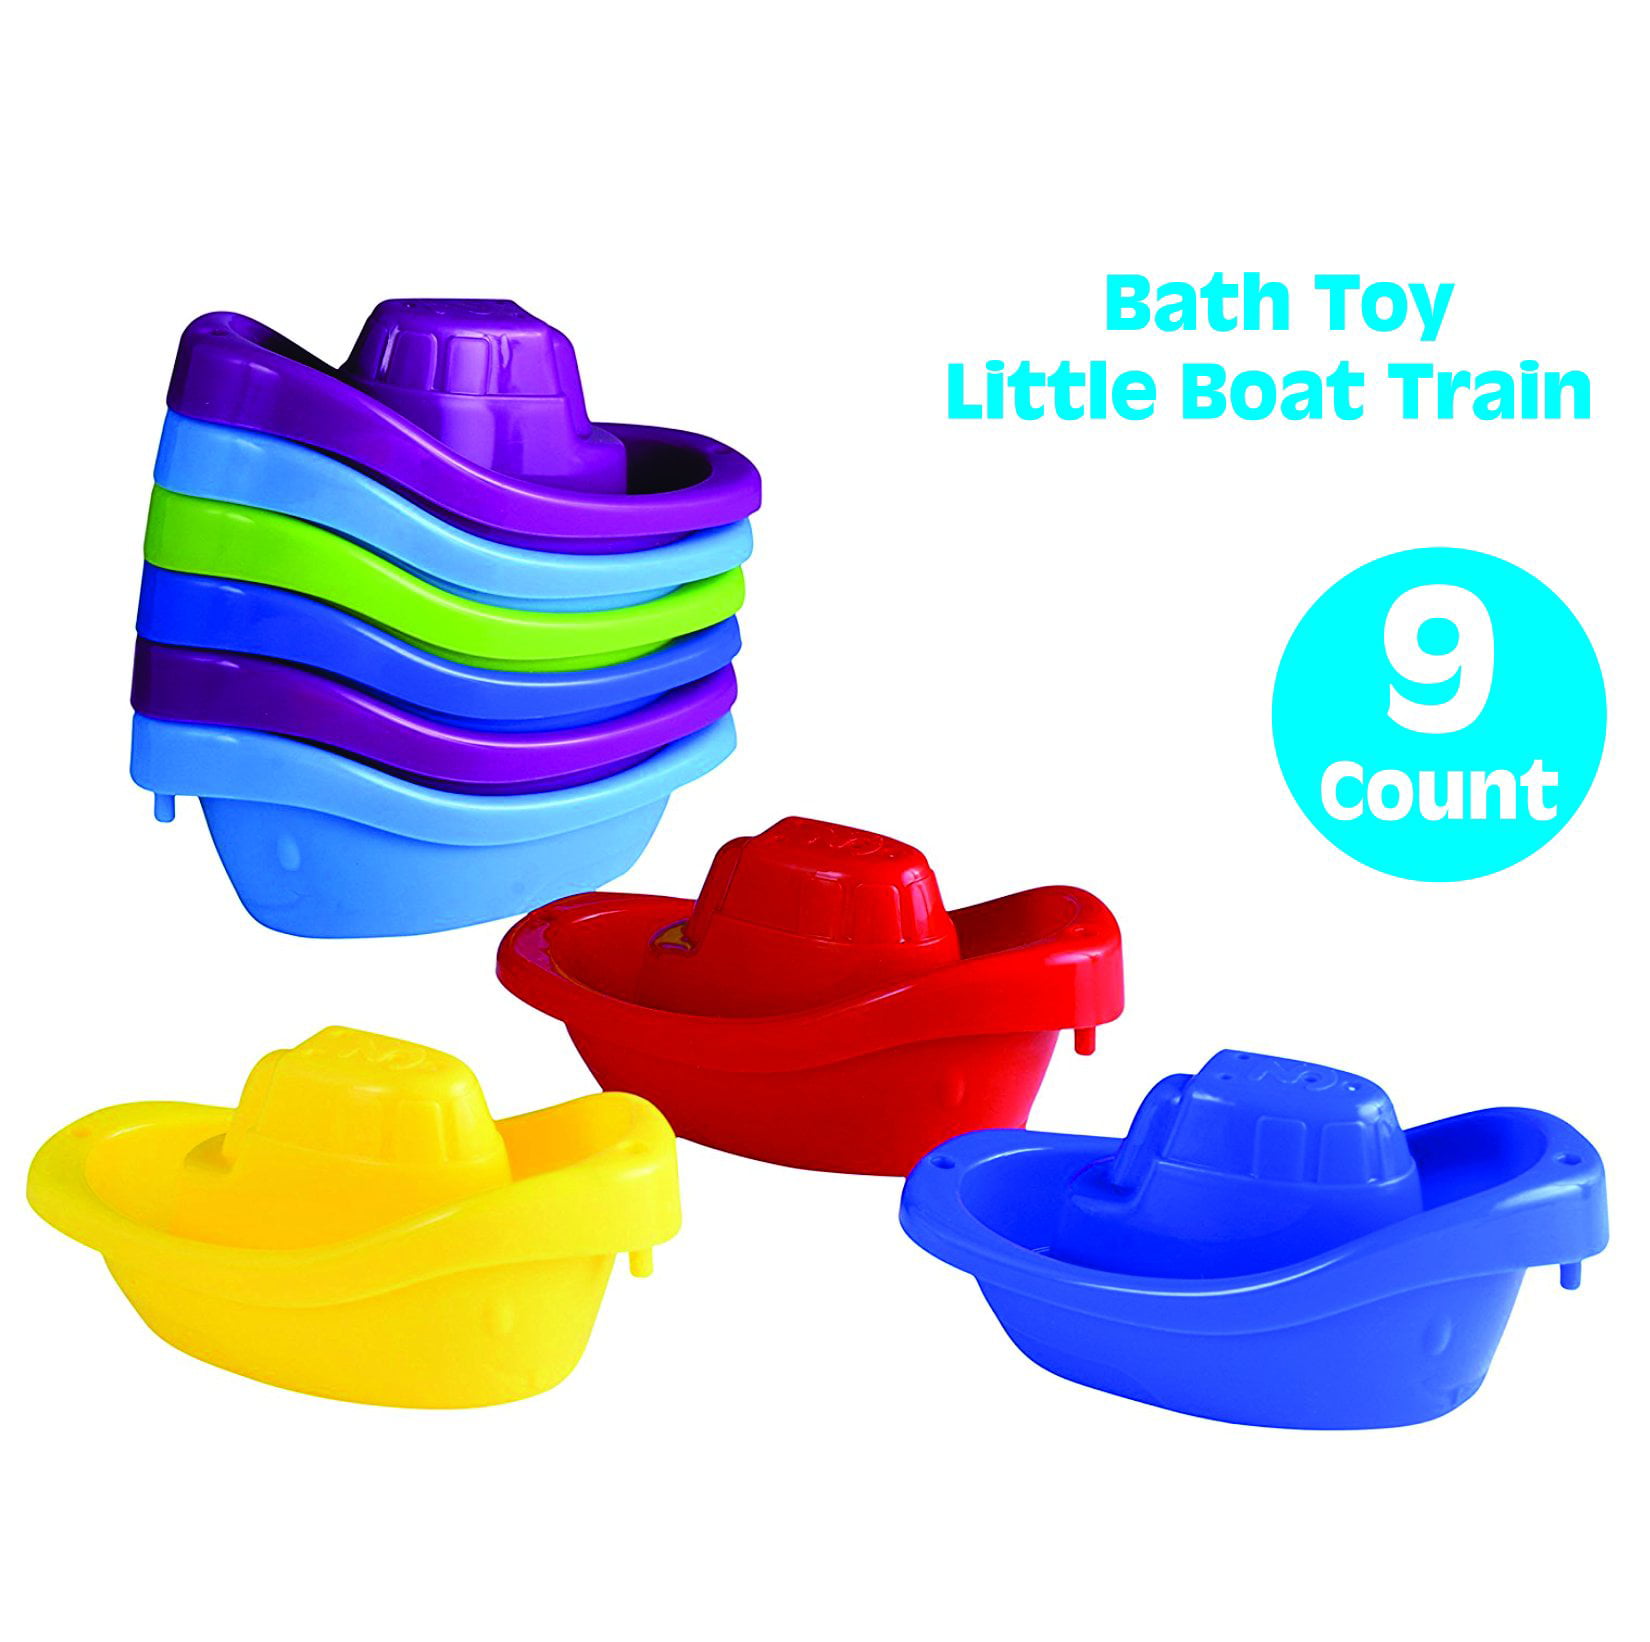 Playkidz Bath Toy Little Boat Train Pack of 9 Stackable